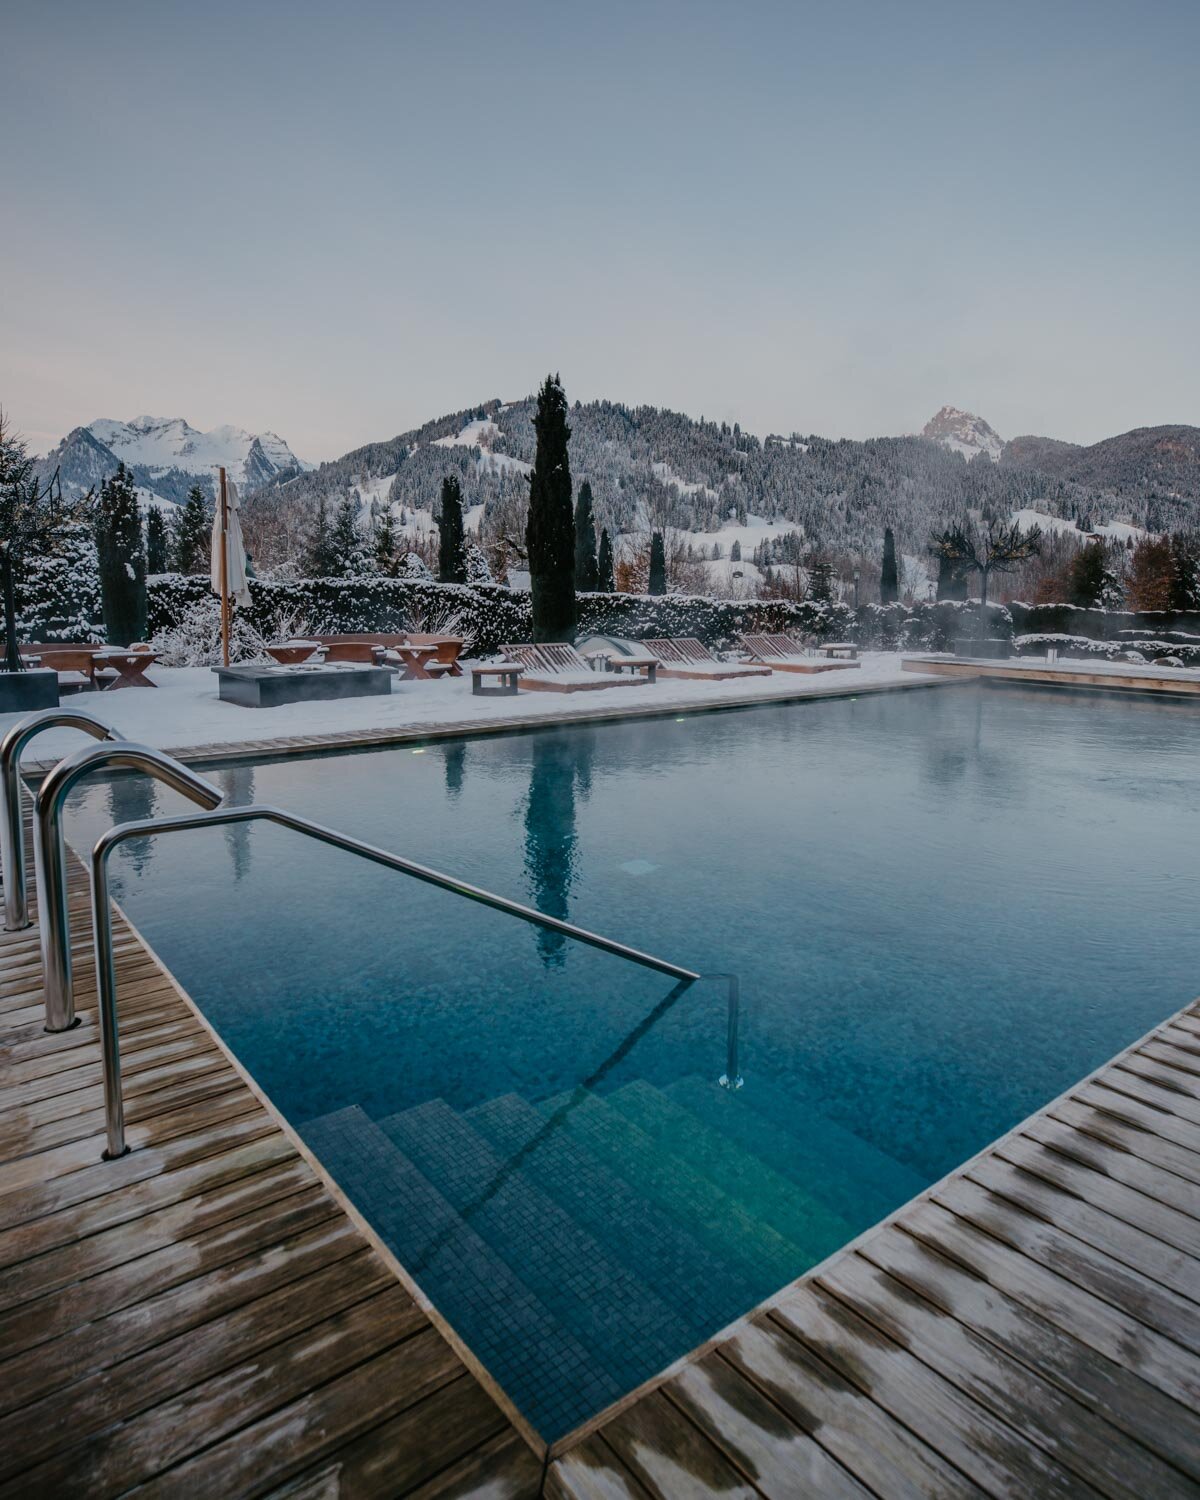 Where to Stay in Switzerland - The Alpina Gstaad — Madeline Lu